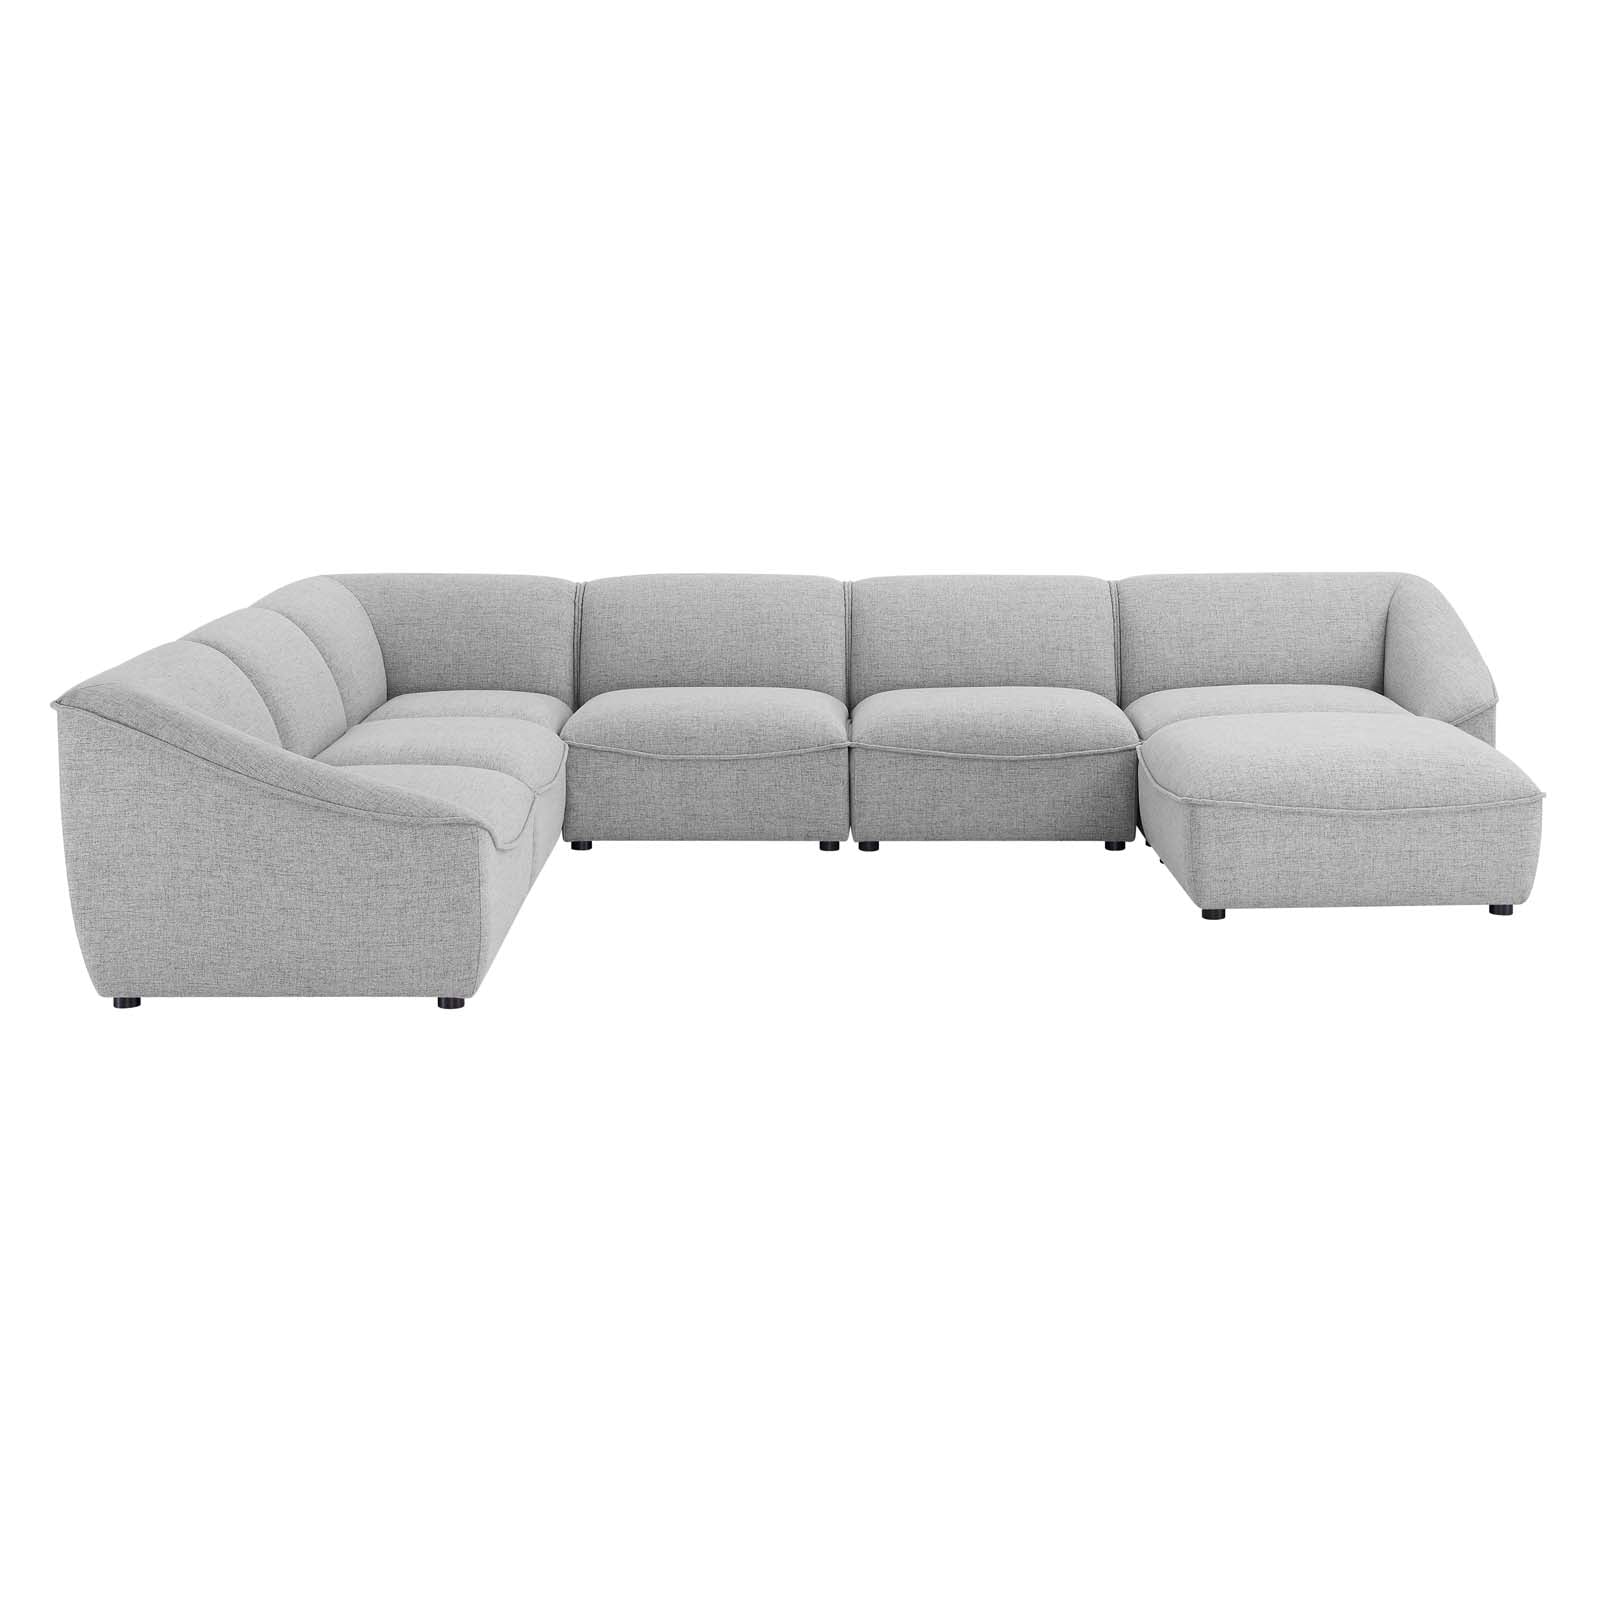 Modway Sectional Sofas - Comprise-7-Piece-Sectional-Sofa-Light-Gray